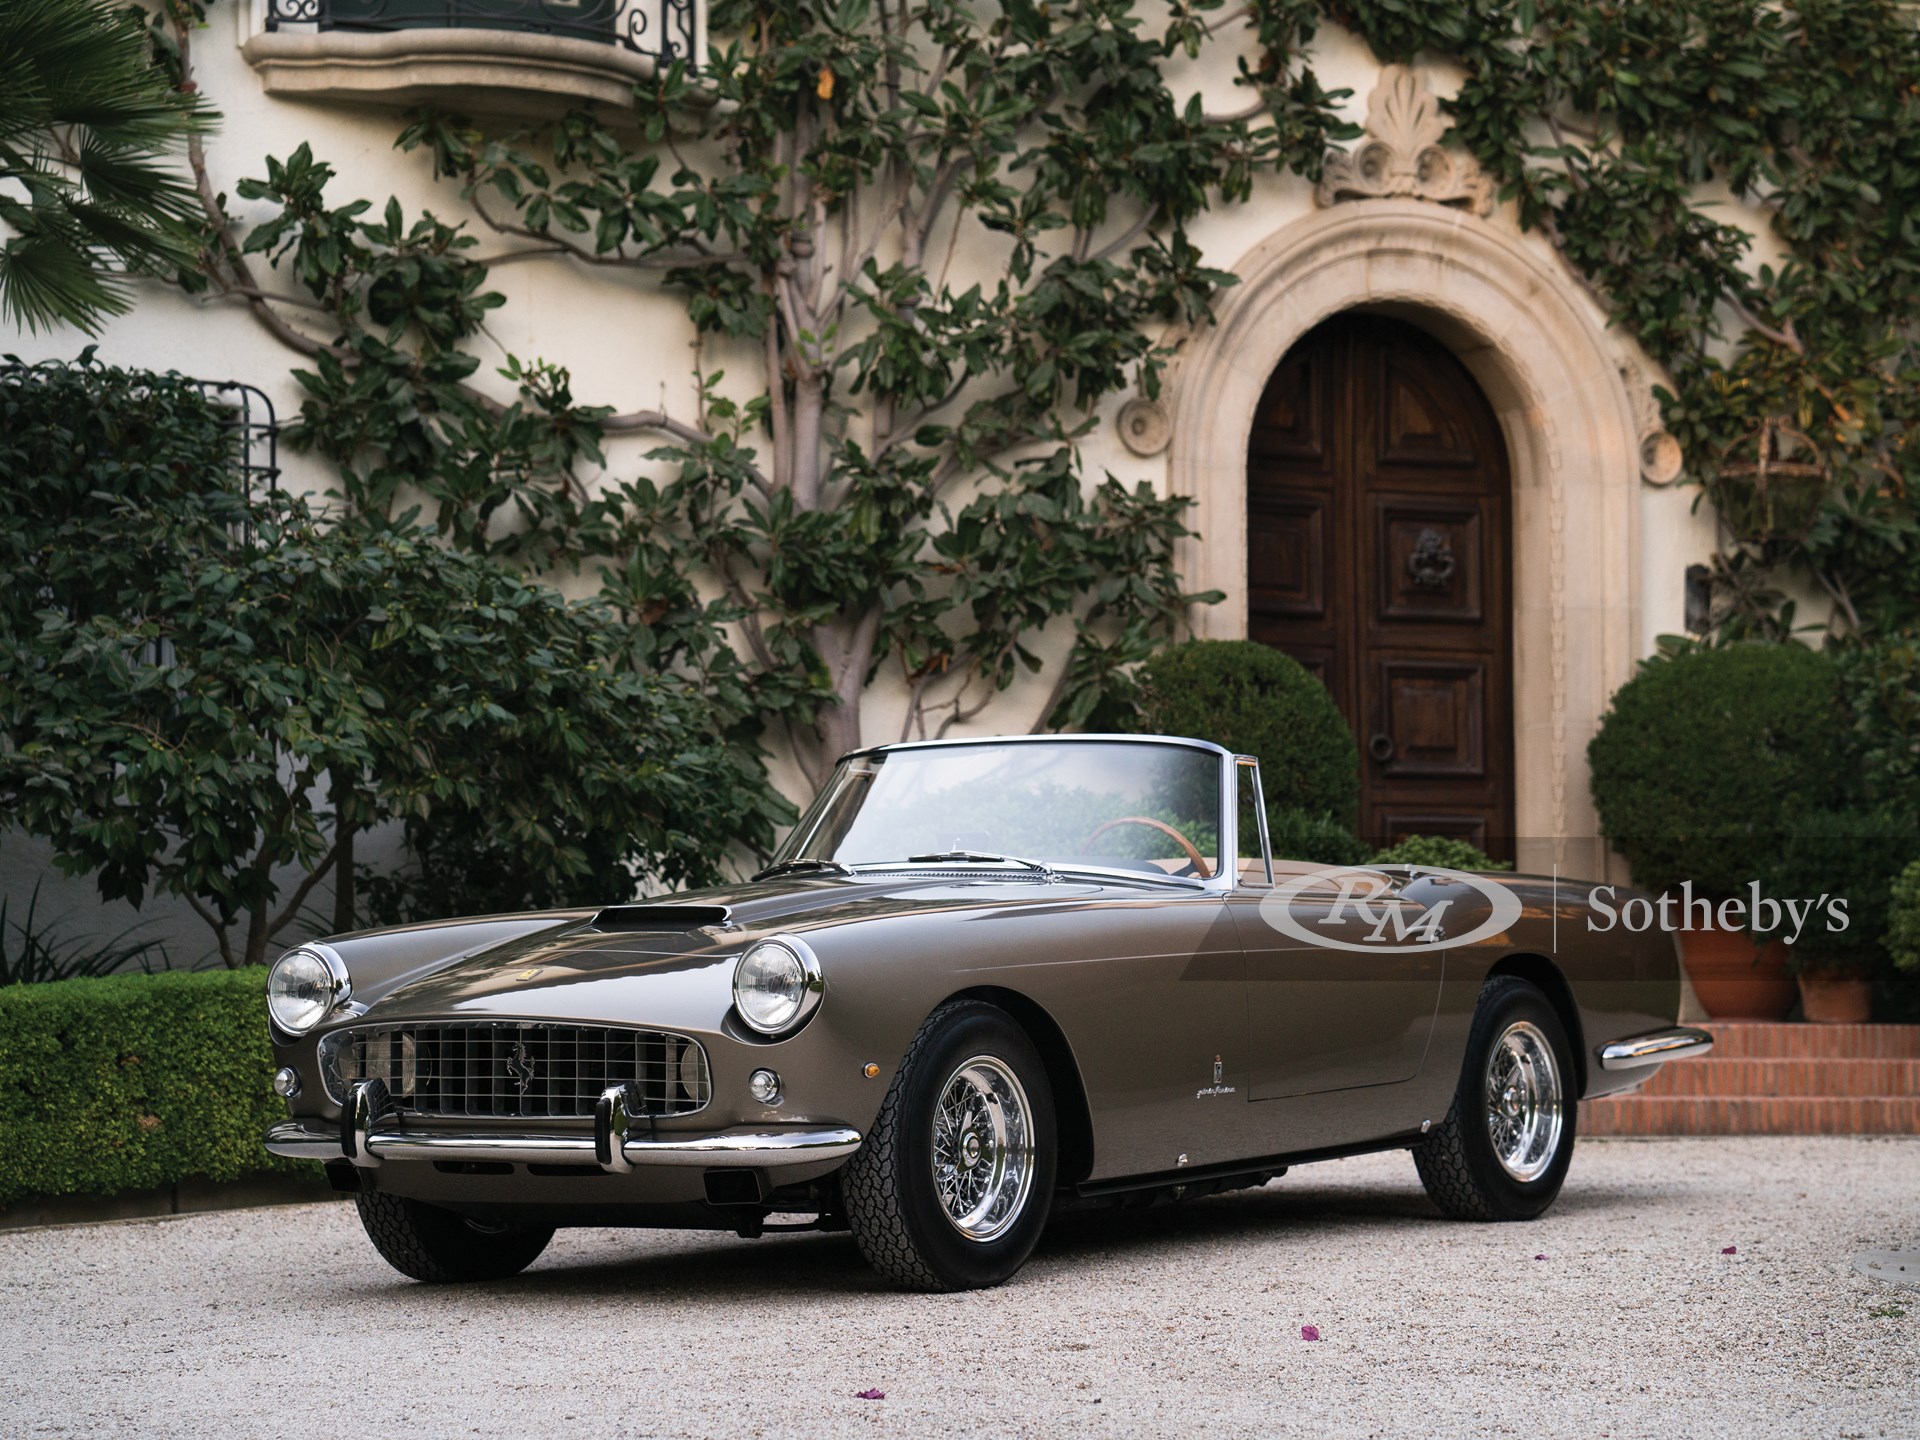 1961 Ferrari 250 Gt Cabriolet Series Ii By Pininfarina New York Icons 17 Rm Sotheby S